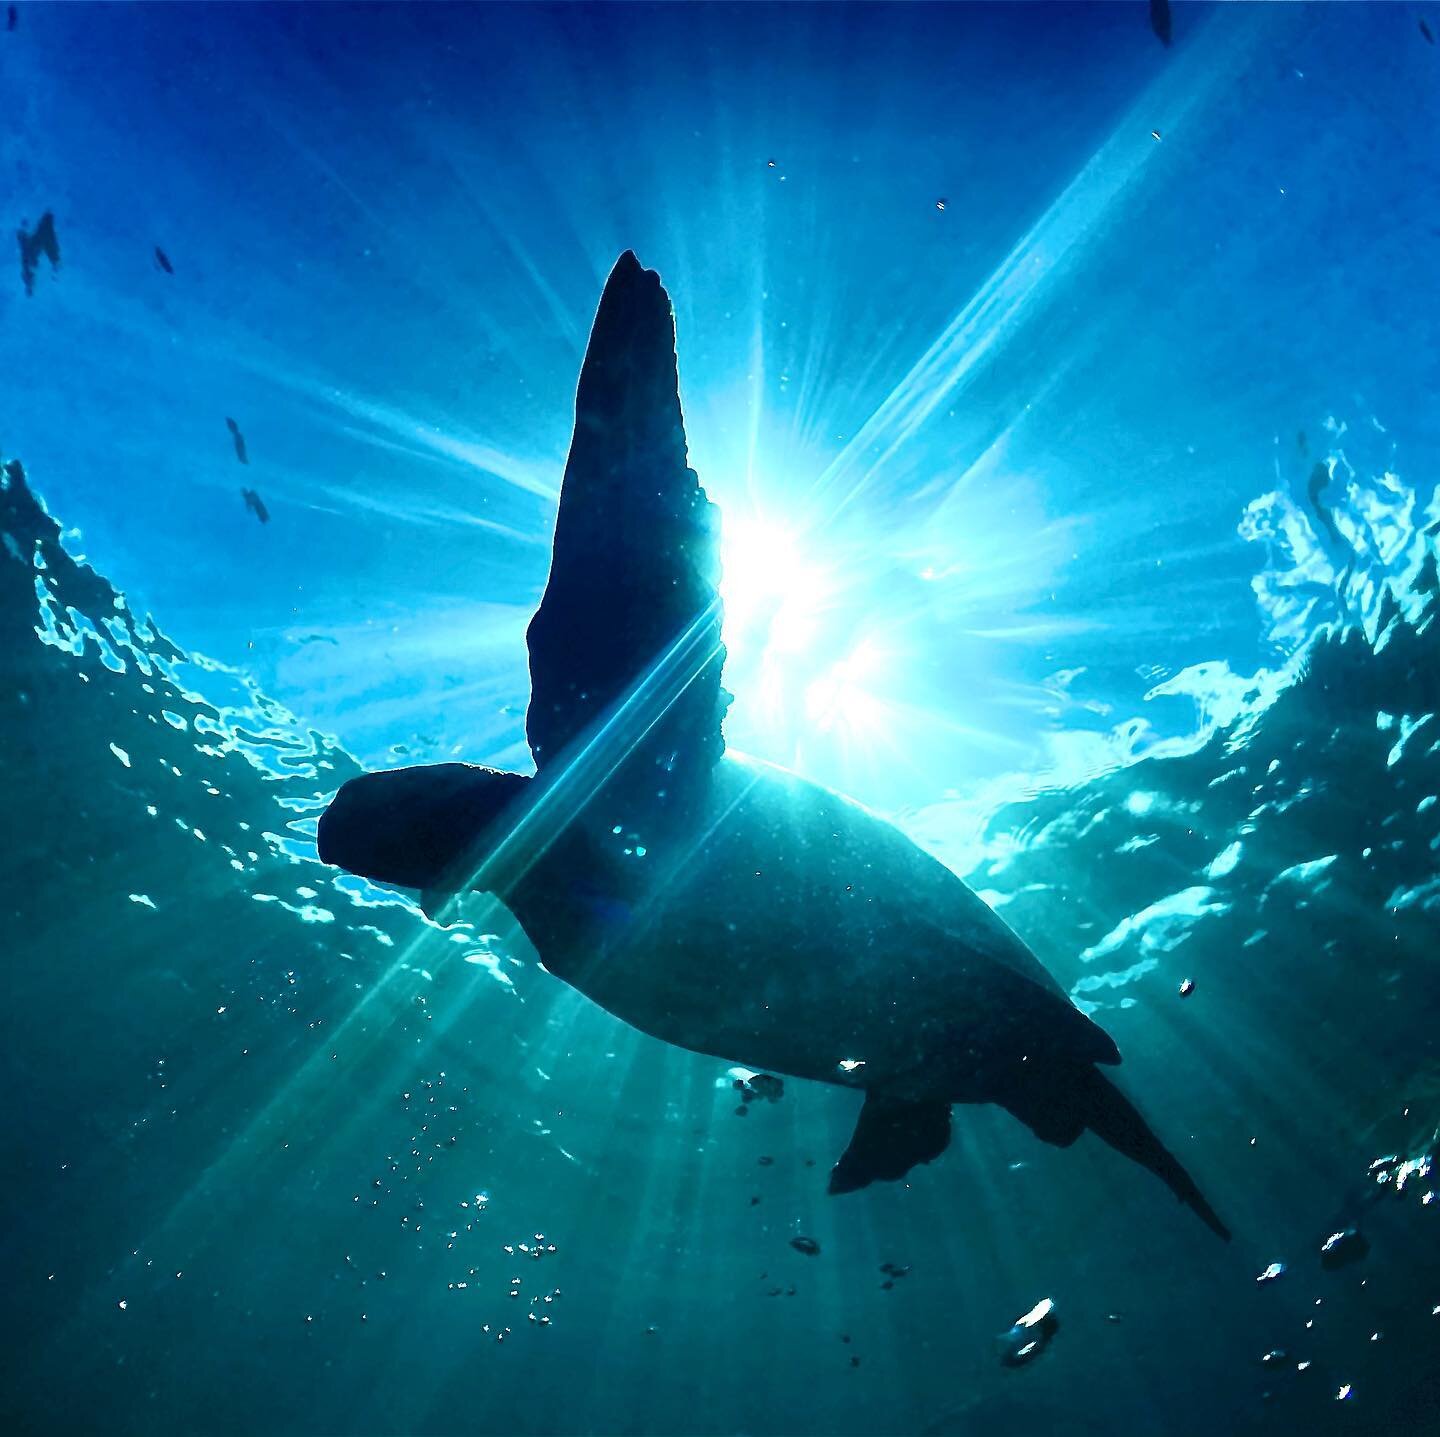 Need a boost today? Reach out and grab a flipper ❤️ I&rsquo;ve been shooting a lot recently underwater &laquo;&nbsp;toward the light,&nbsp;&raquo; I love silhouettes but I think more than that it&rsquo;s about staying bathed in the light during these